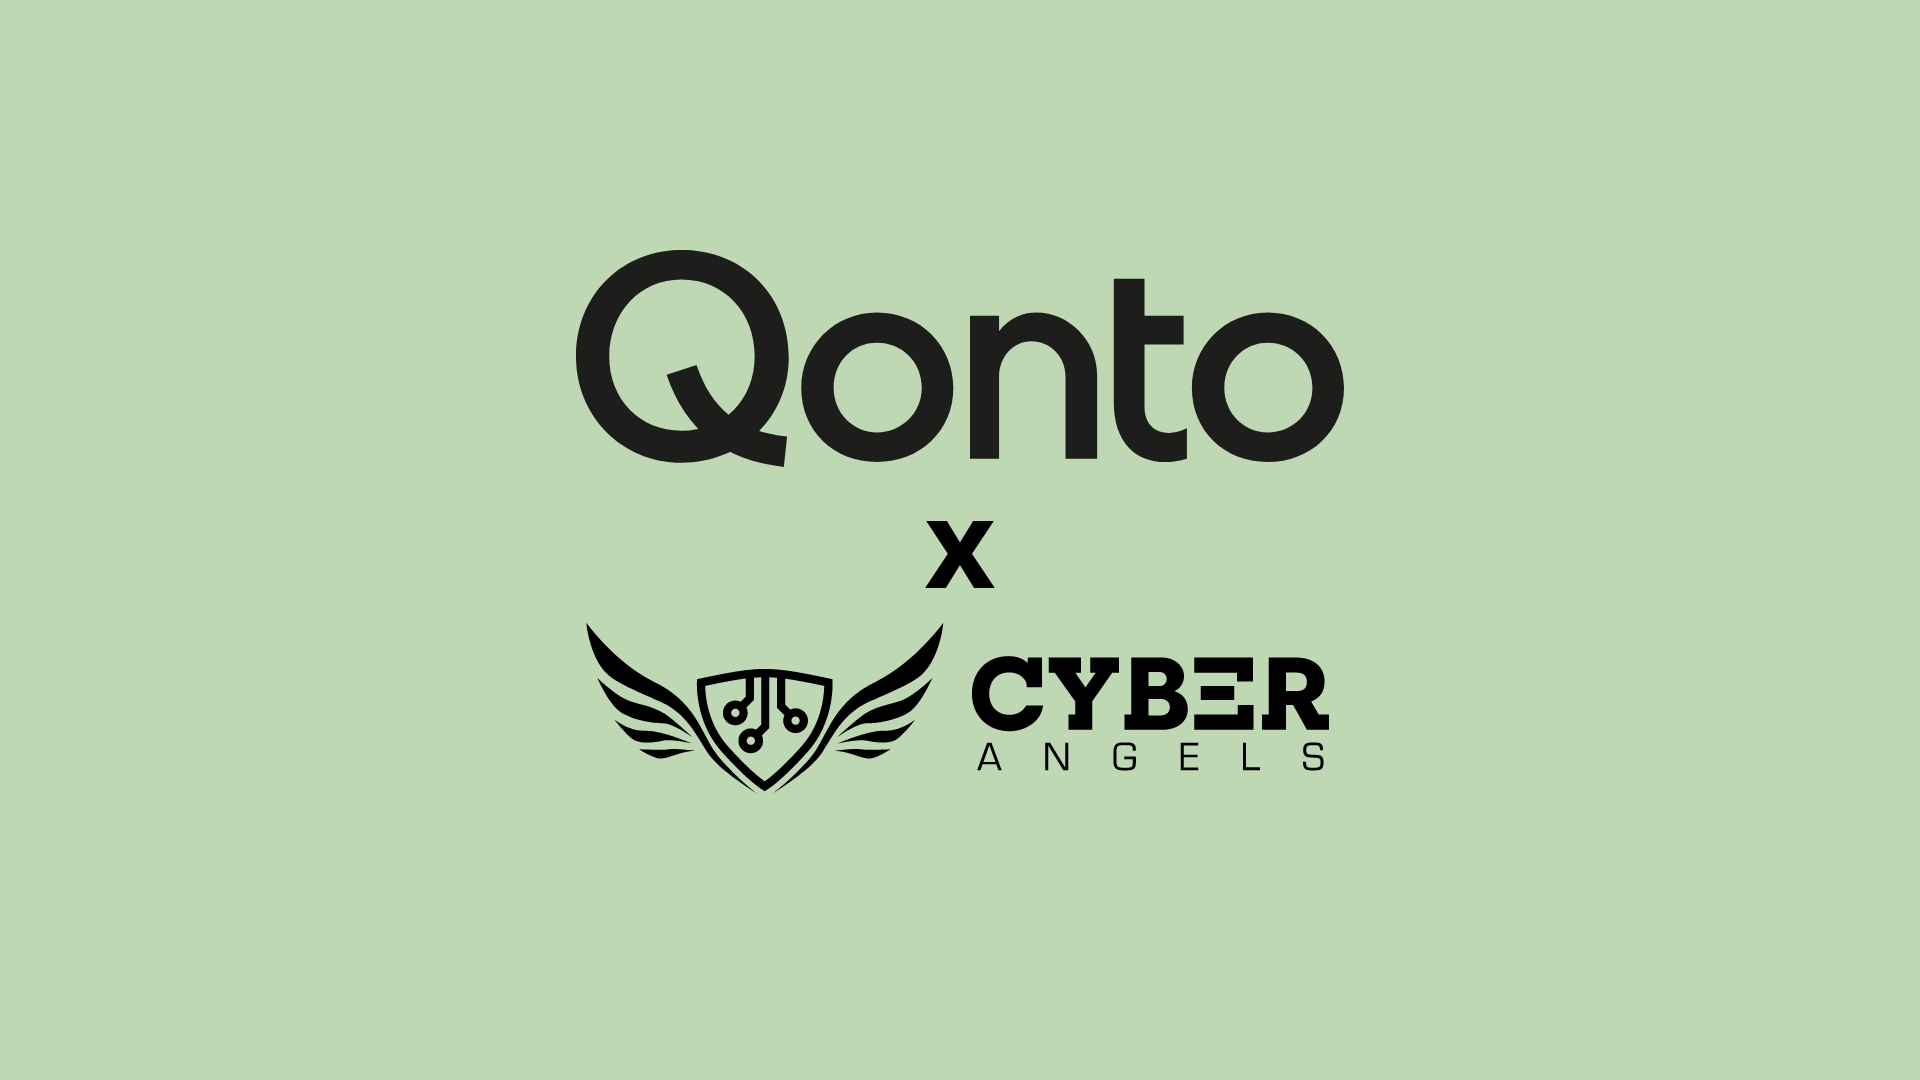 Cyberangels and Qonto: A Collaboration for a Safer Future